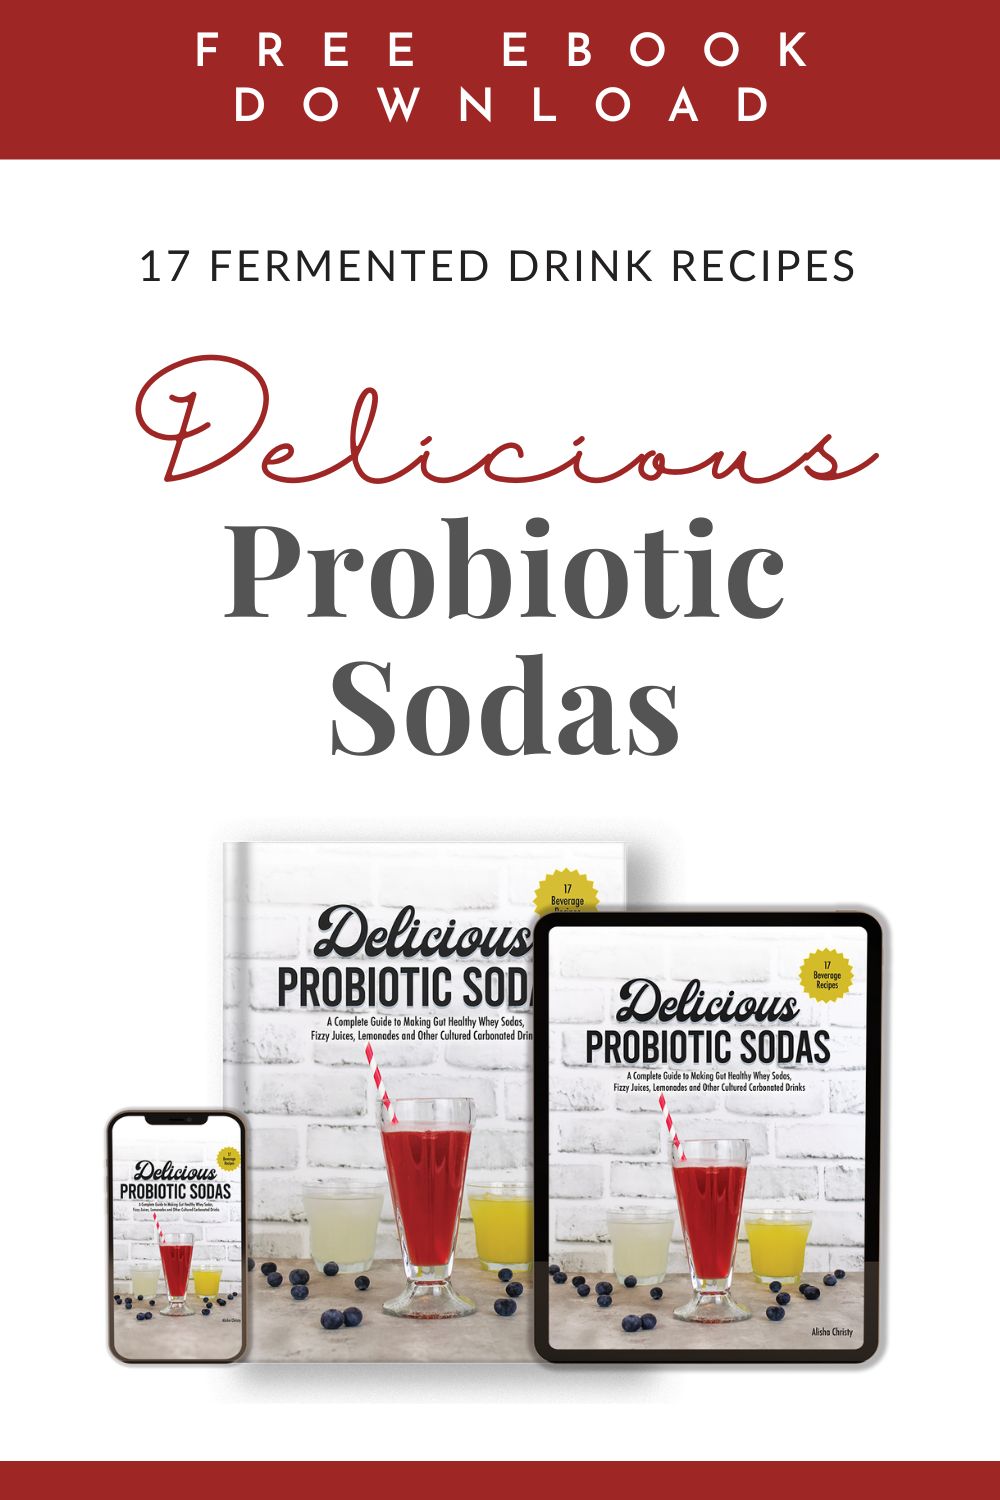 pinterest graphic featuring the cover of a free ebook about making probiotic soda at home